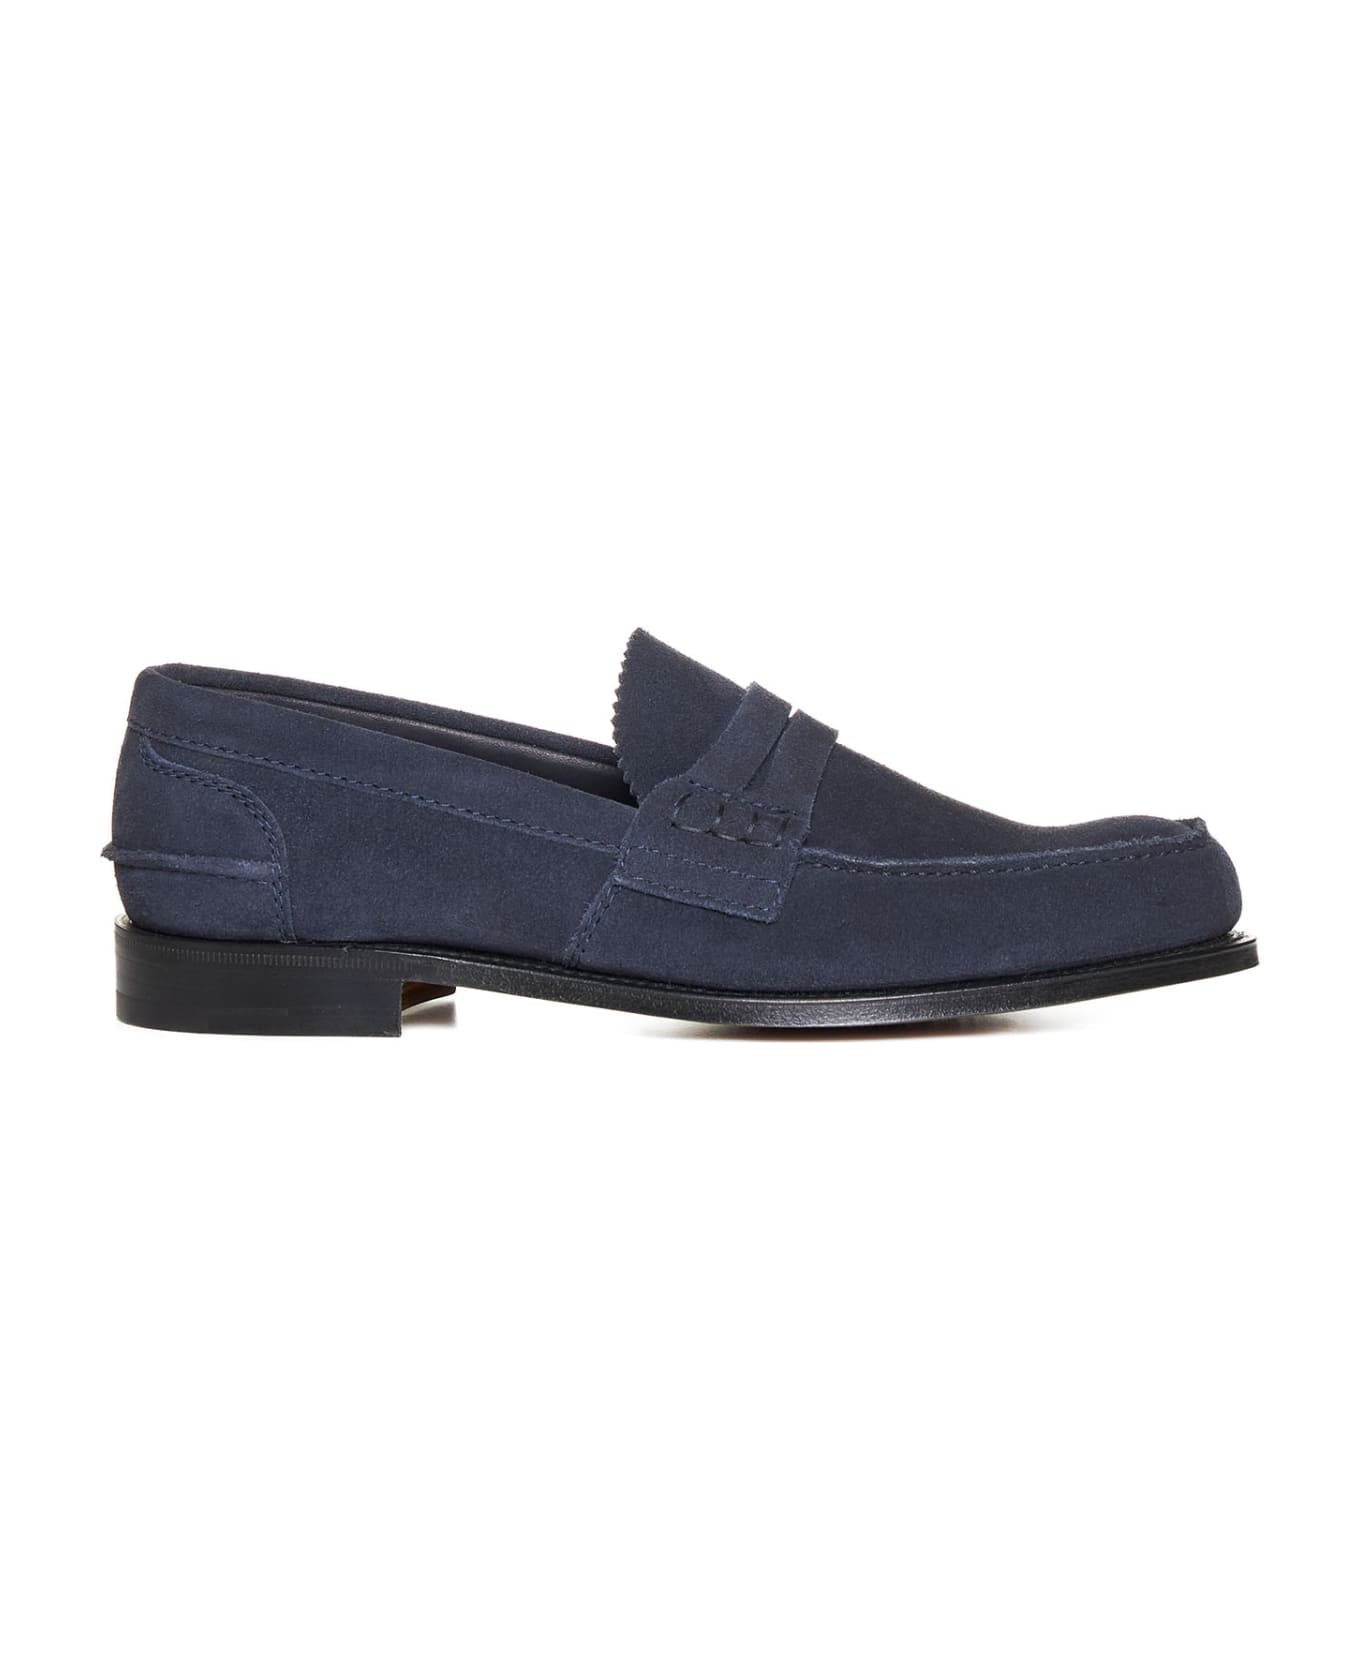 Church's Loafers - Navy blue